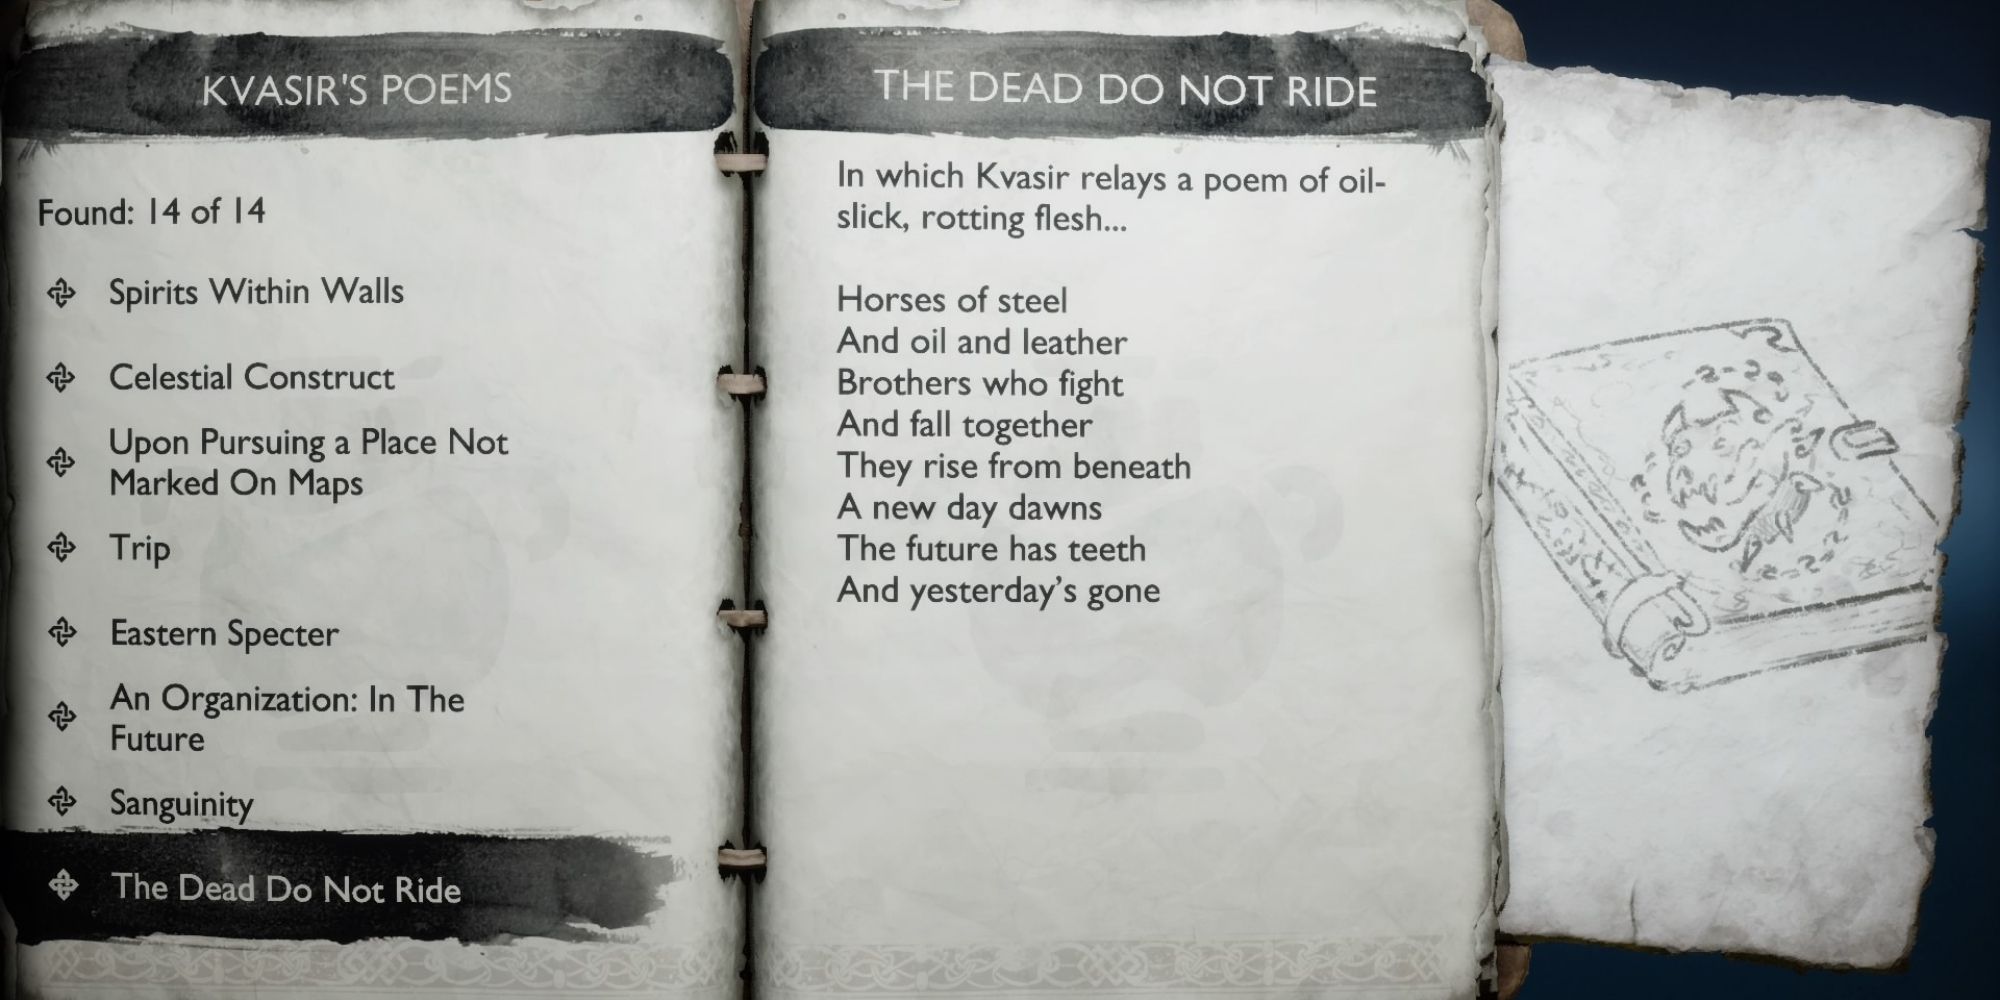 Krato's journal open to the page about The Dead Do Not Ride